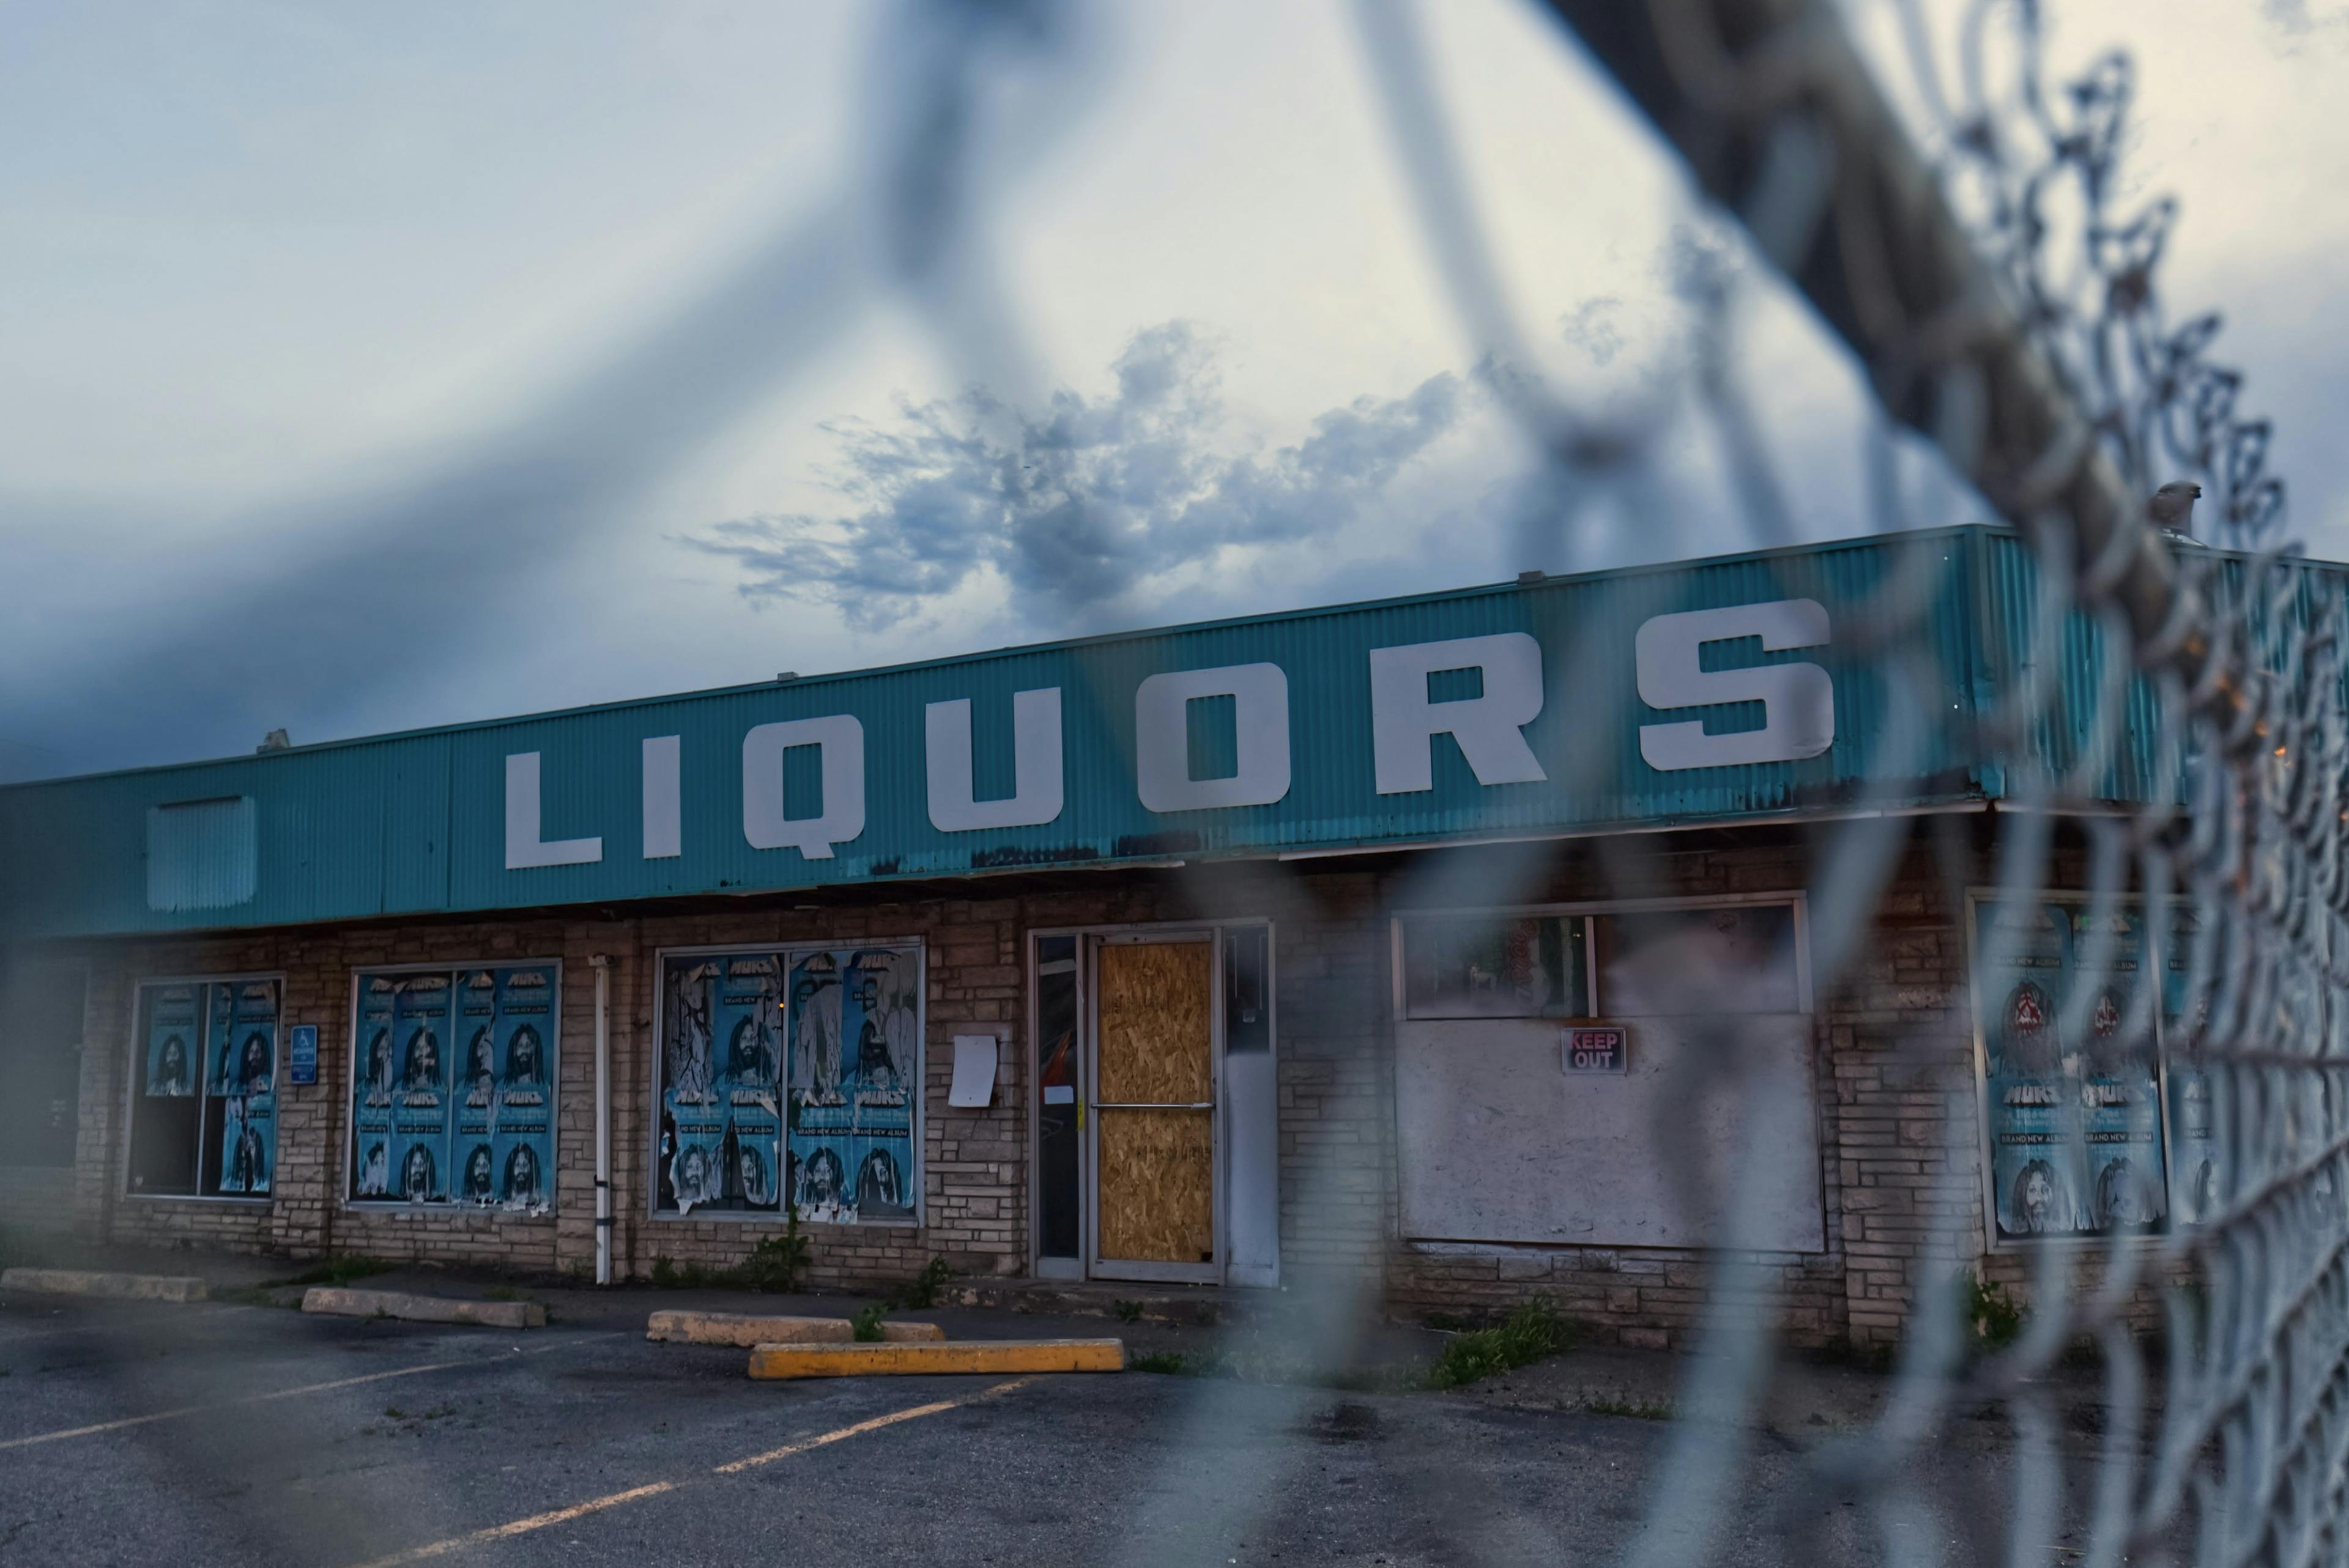 The outside of a liquor store is seen through a chain link fence.